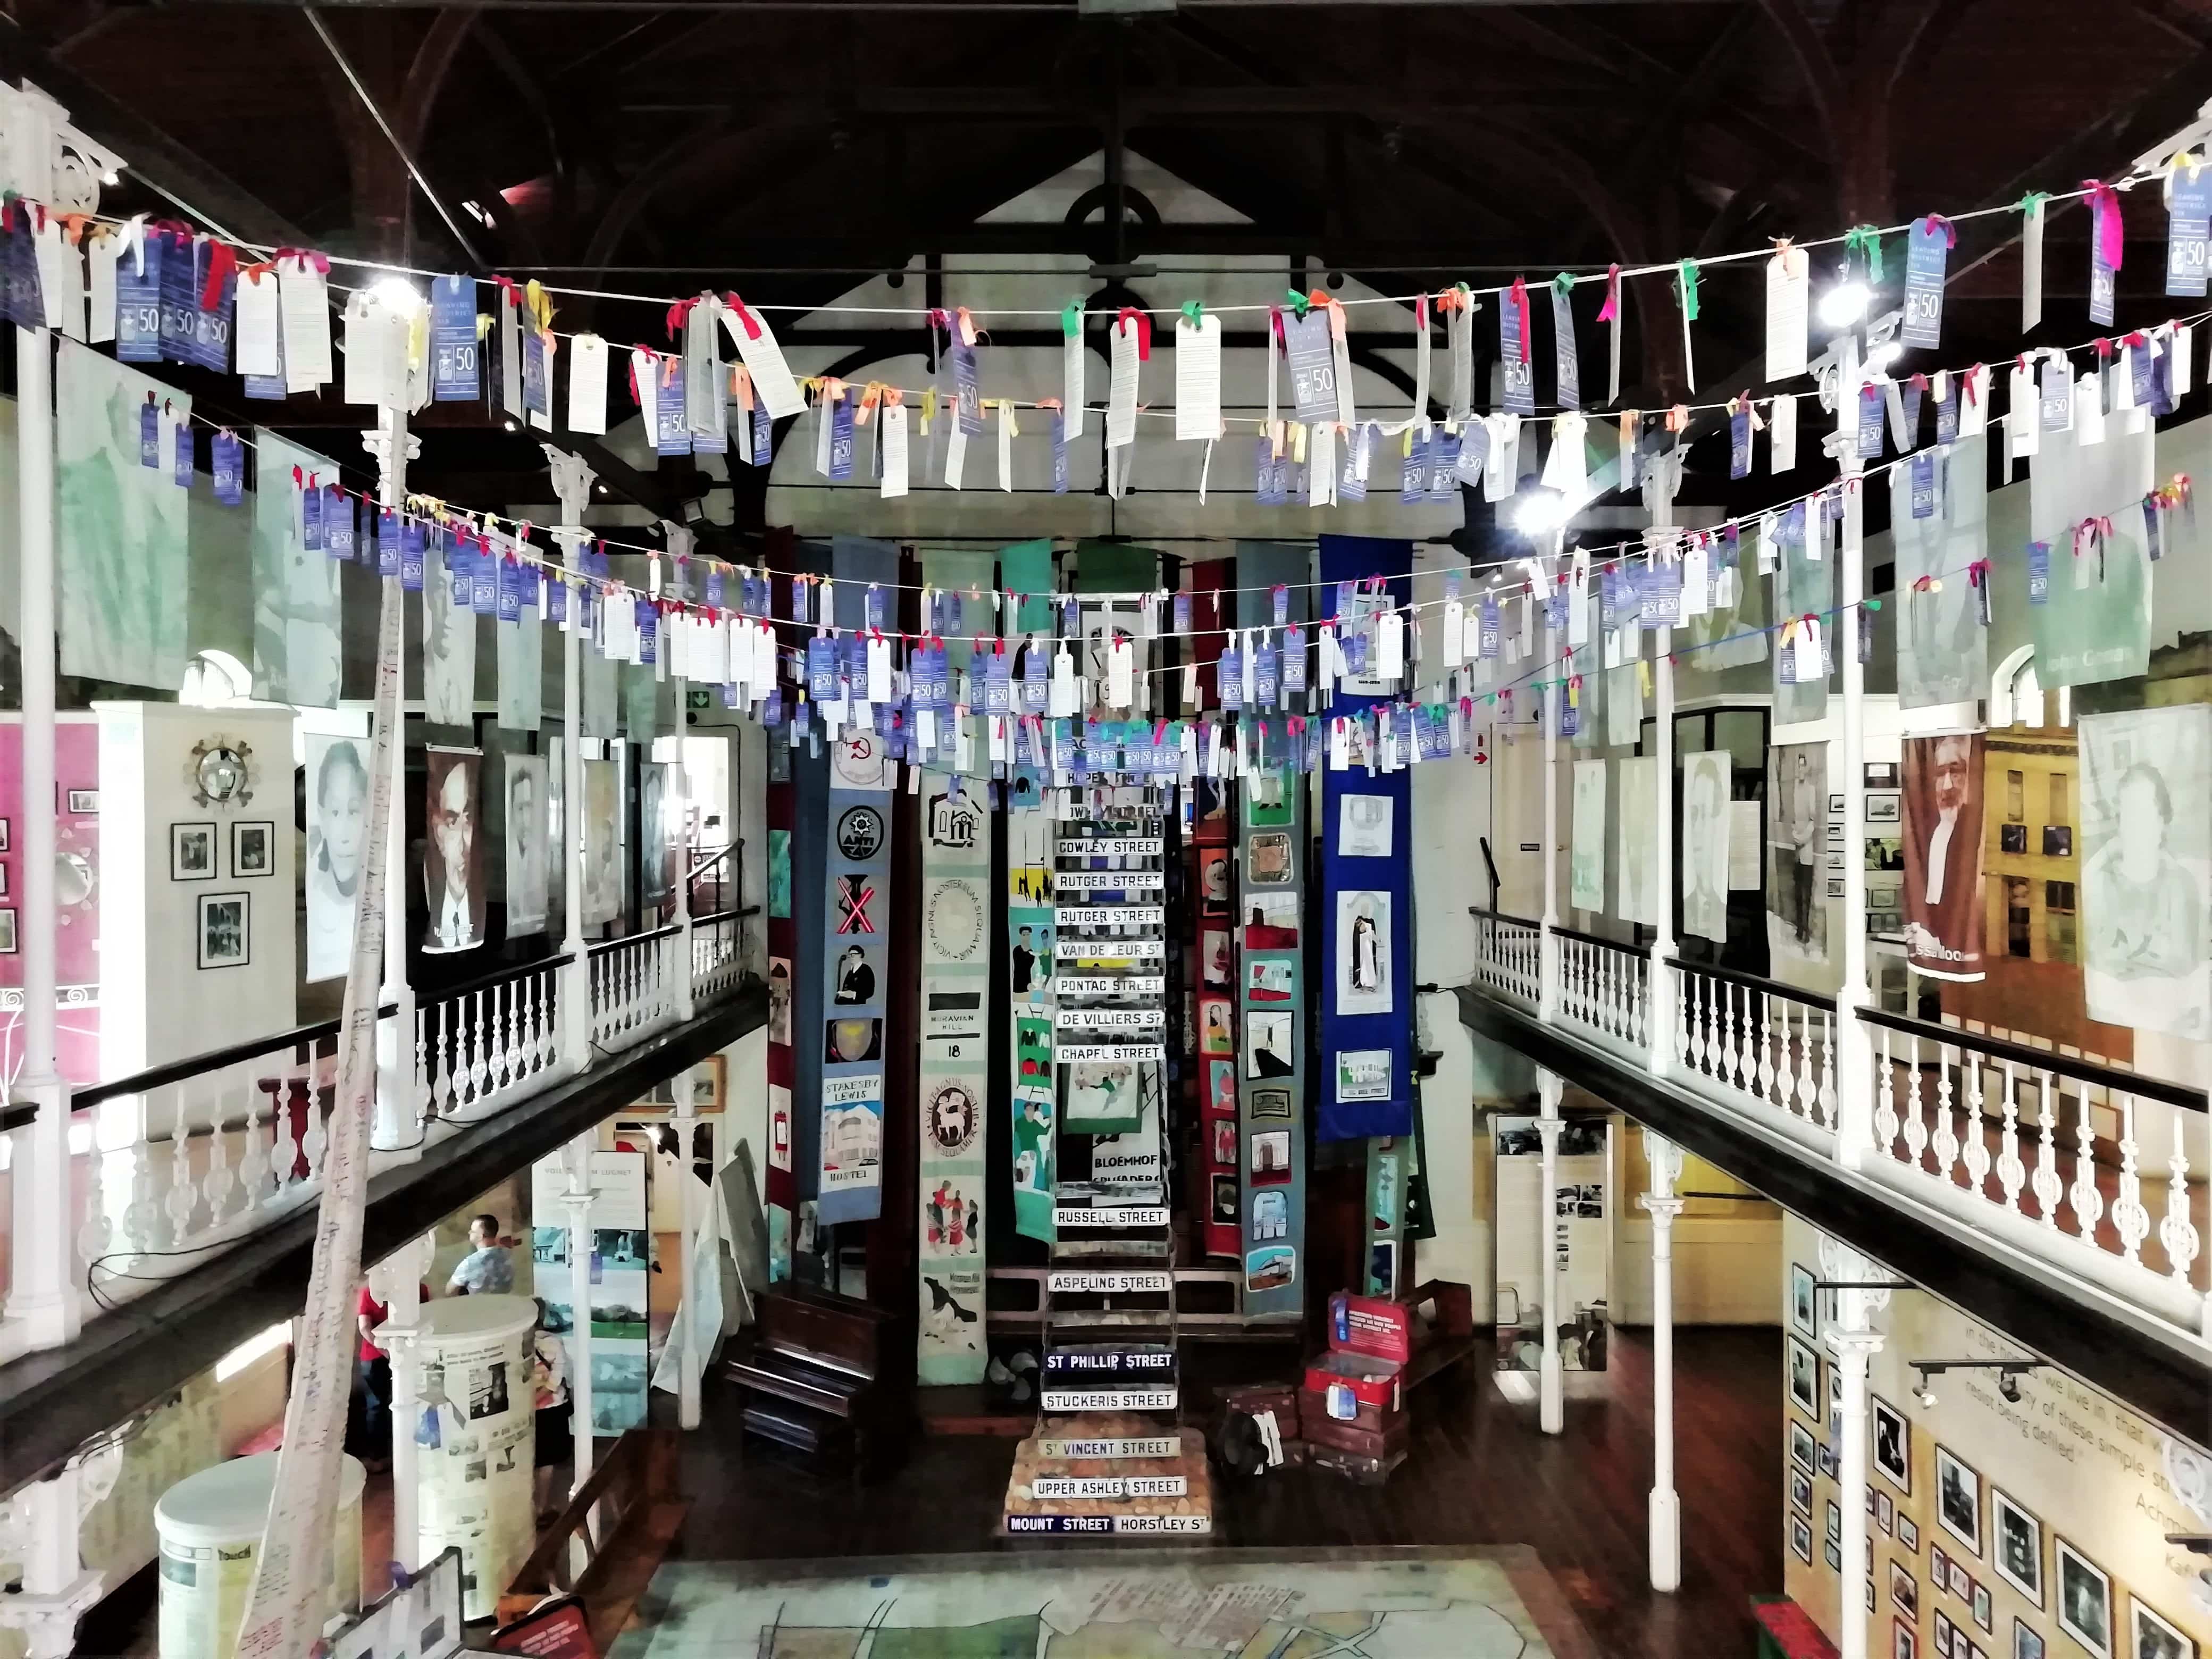 The District Six Museum in Cape Town